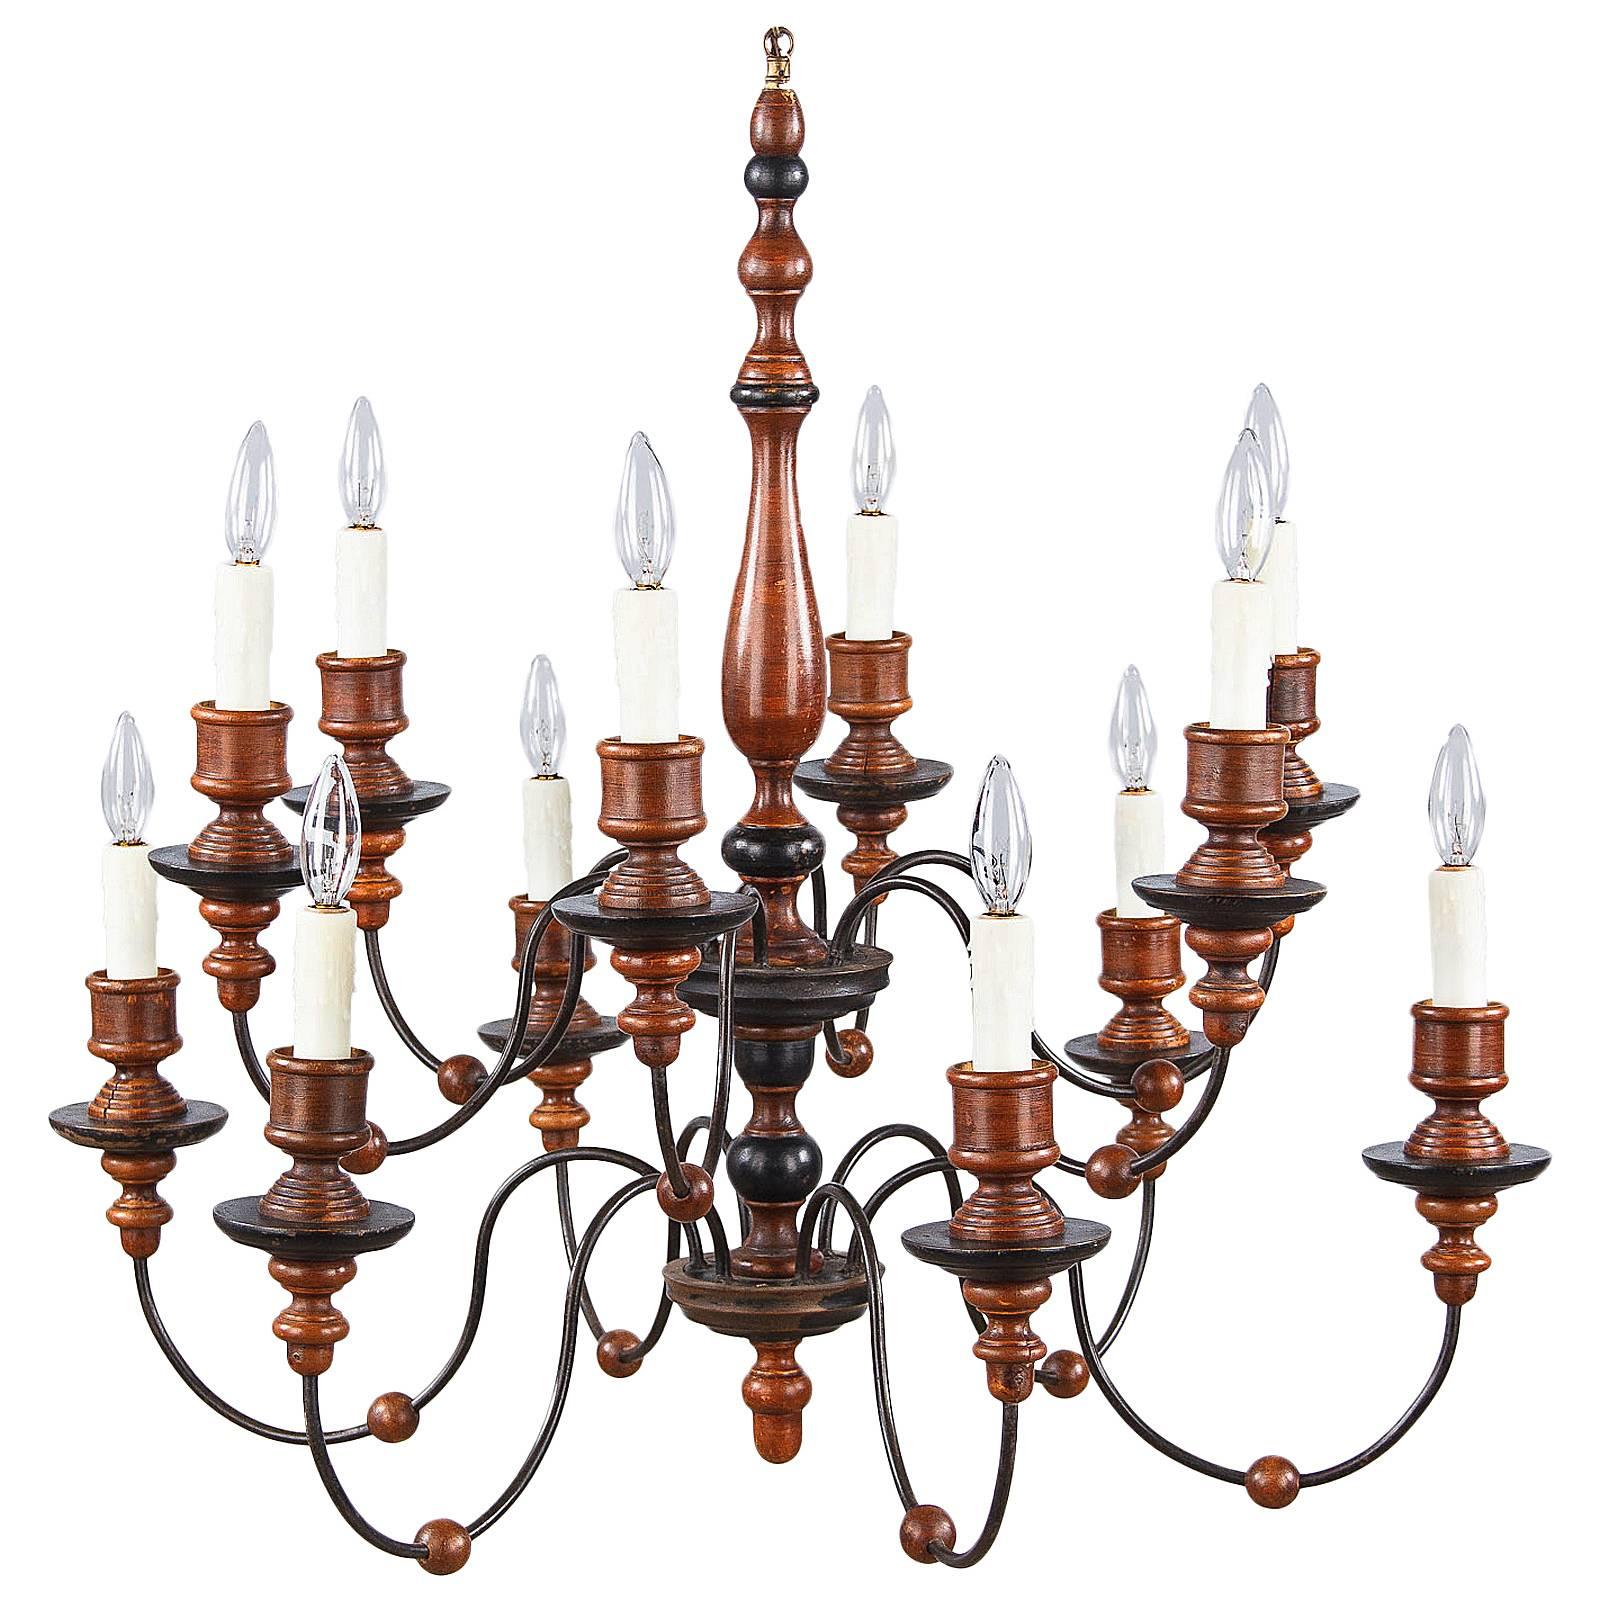 Italian Painted Wood and Metal Chandelier, 1920s-1940s